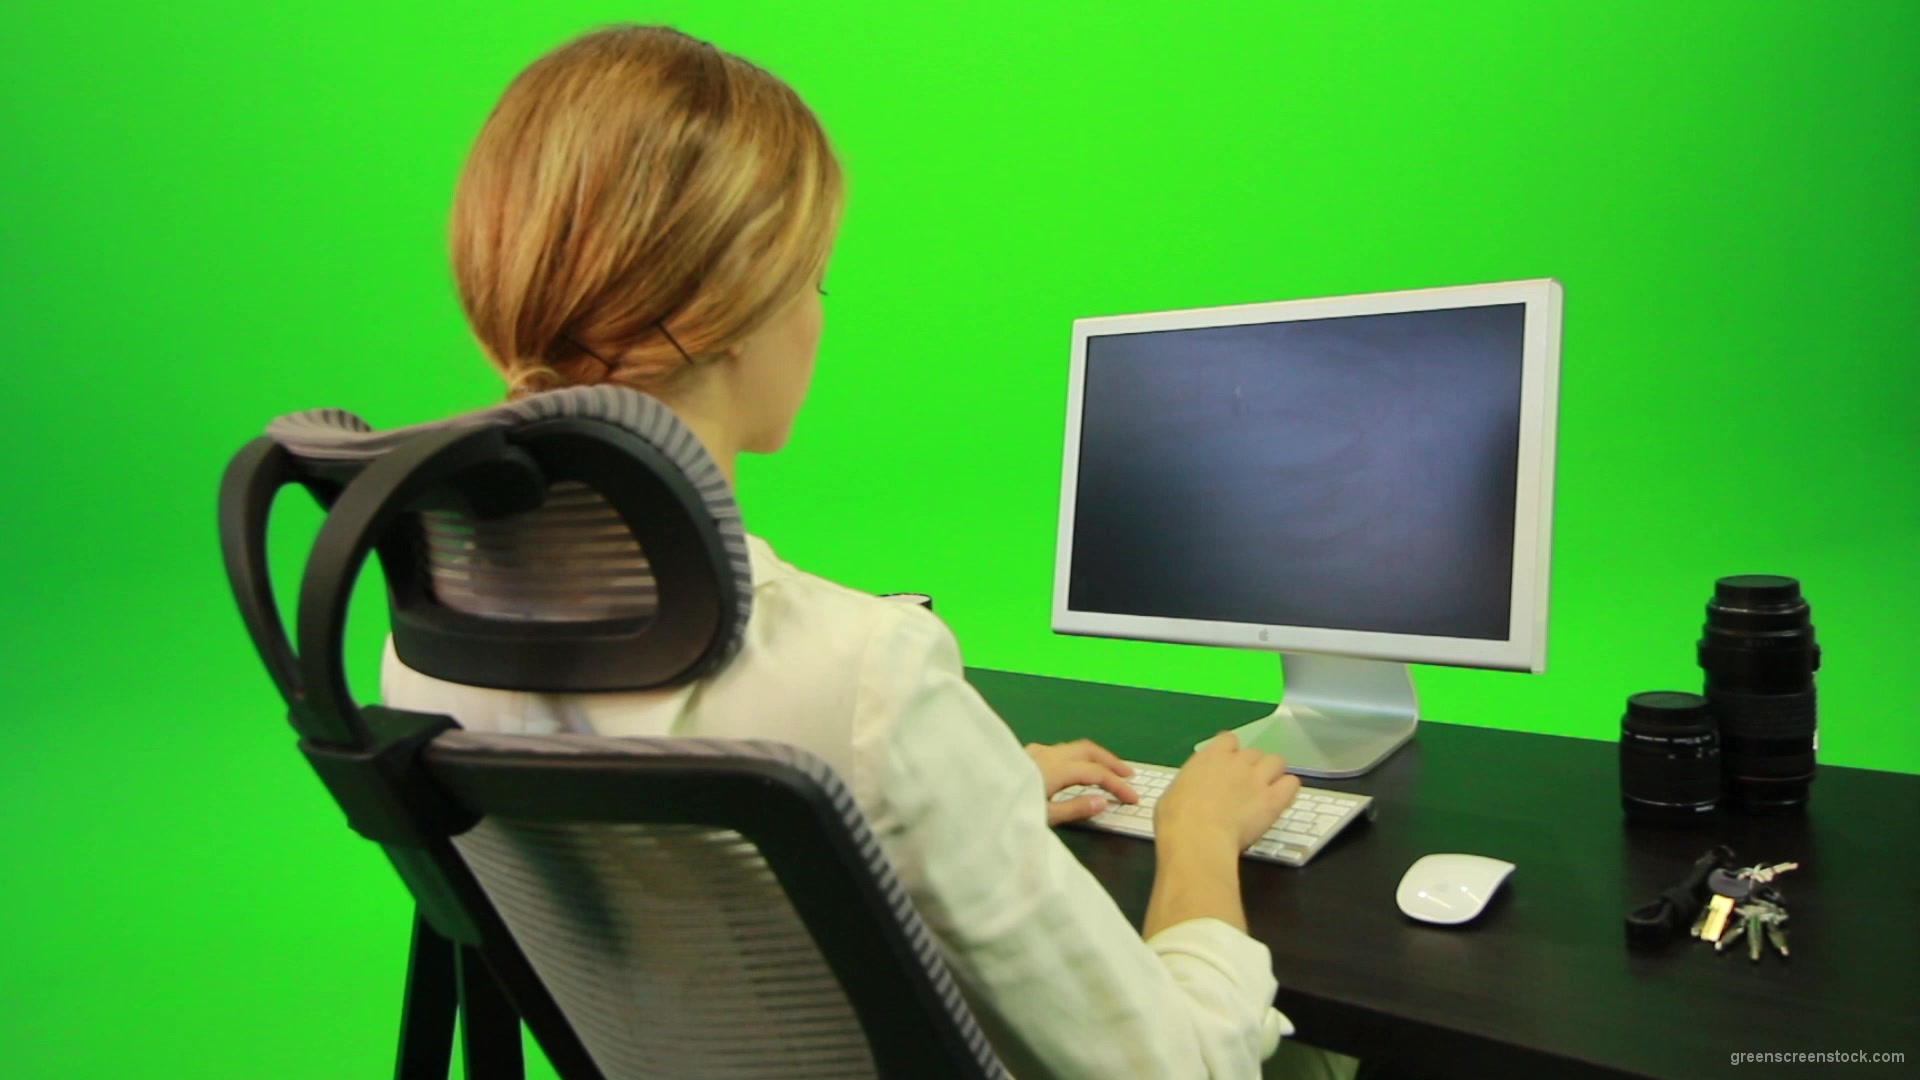 Woman-Working-on-the-Computer-5-Green-Screen-Footage_009 Green Screen Stock